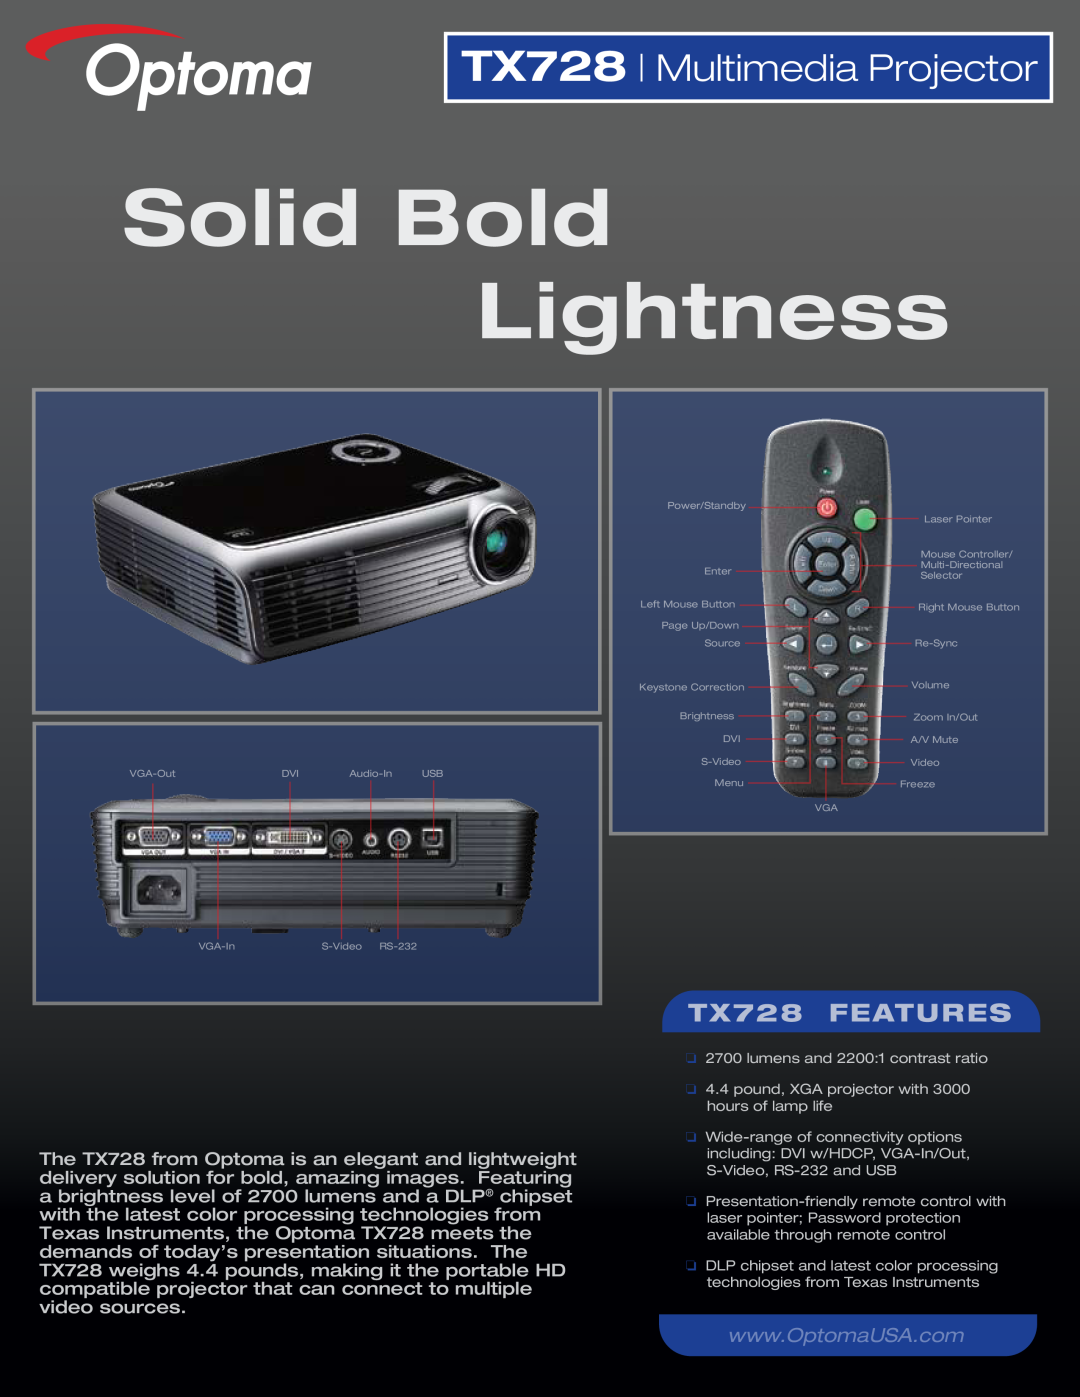 Optoma Technology manual TX728 Multimedia Projector, Solid Bold Lightness, TX728 FEATURES 